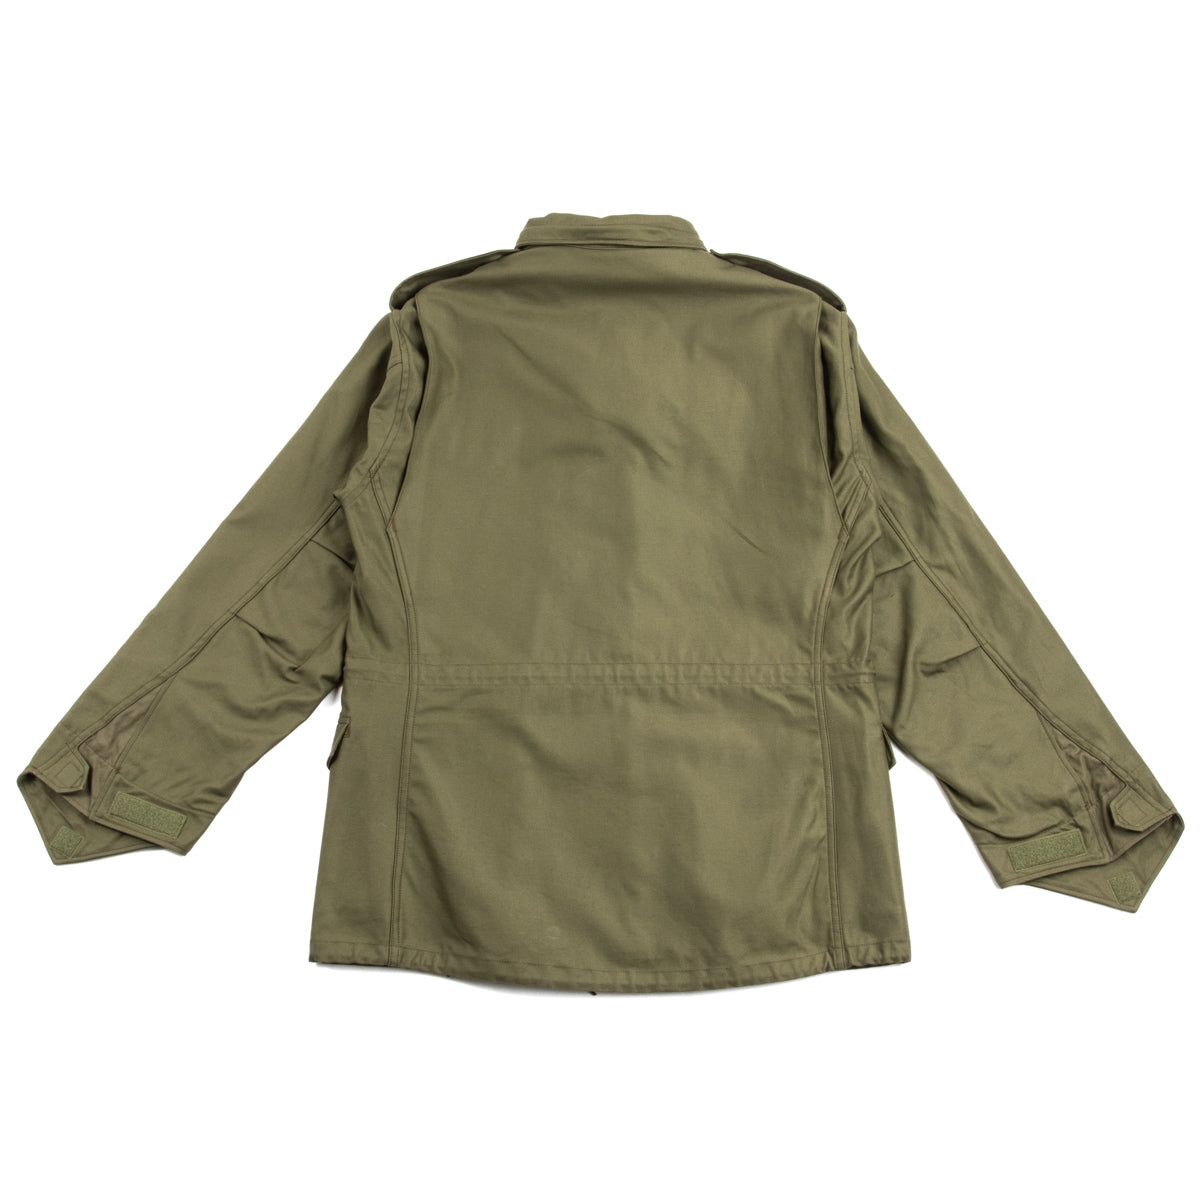 The Real McCoy's M-65 Field Coat - Mitchell Pattern – Standard